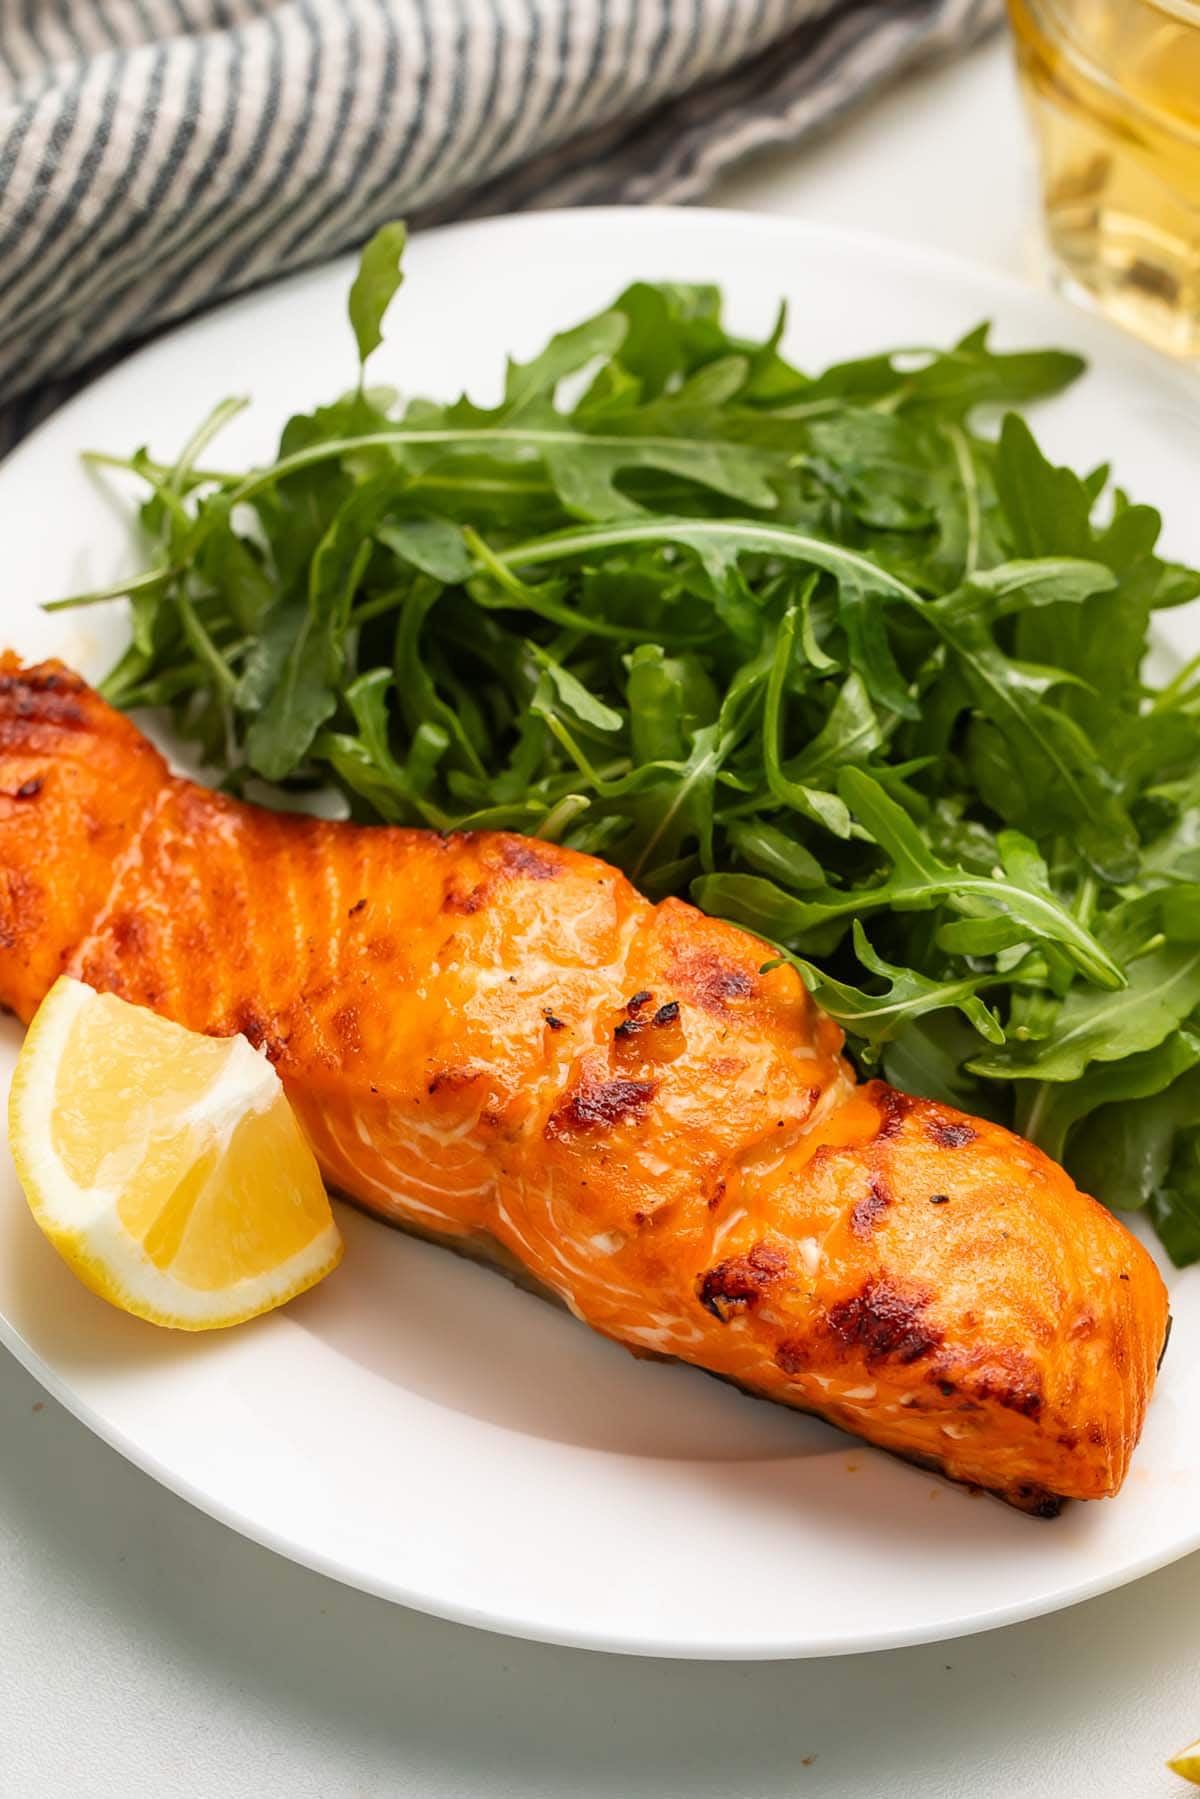 A previously-frozen salmon fillet cooked in the air fryer and served on a plate with a small side salad.